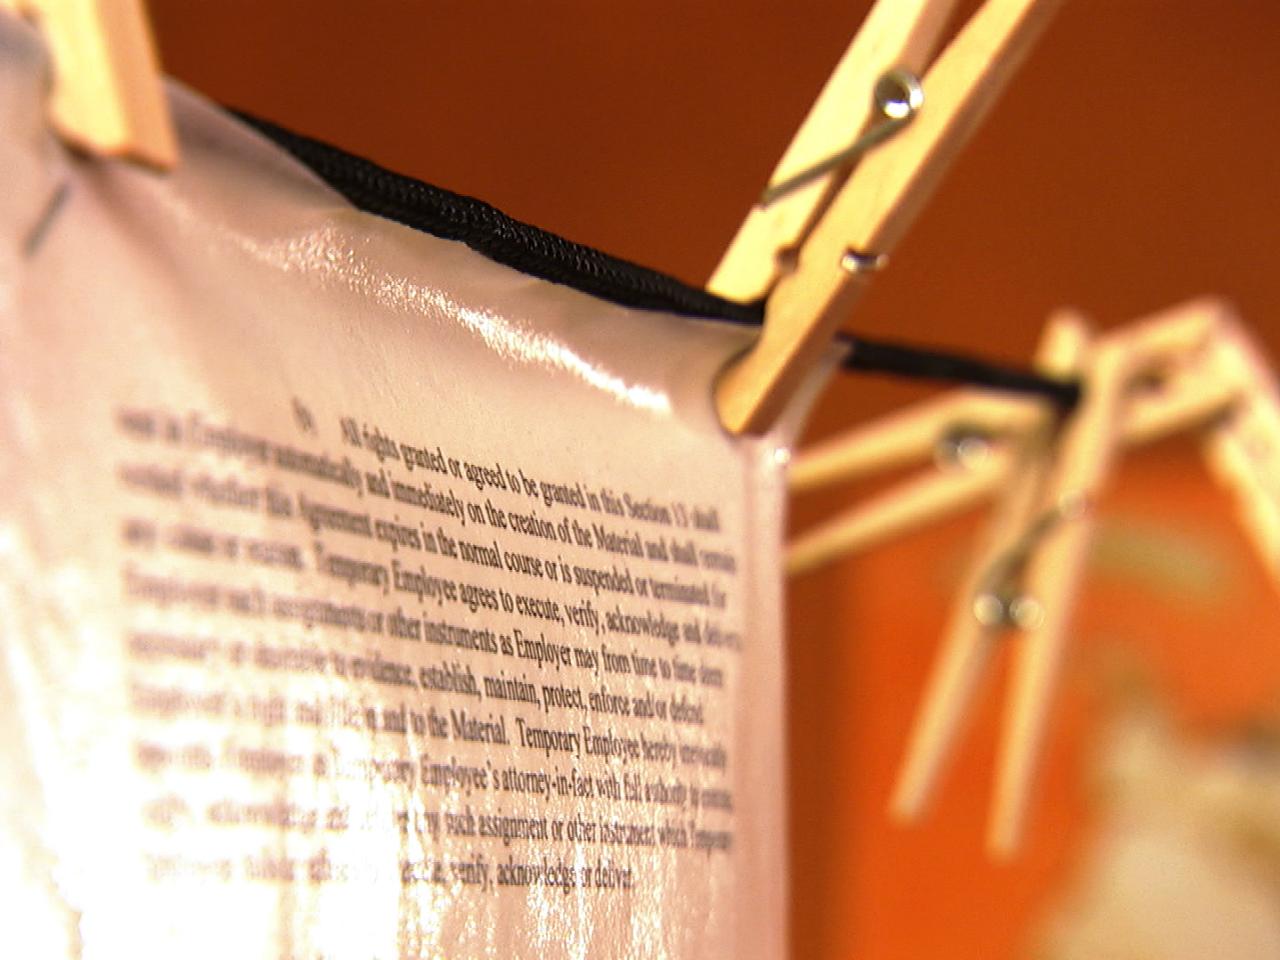 drying documents on clothes pins